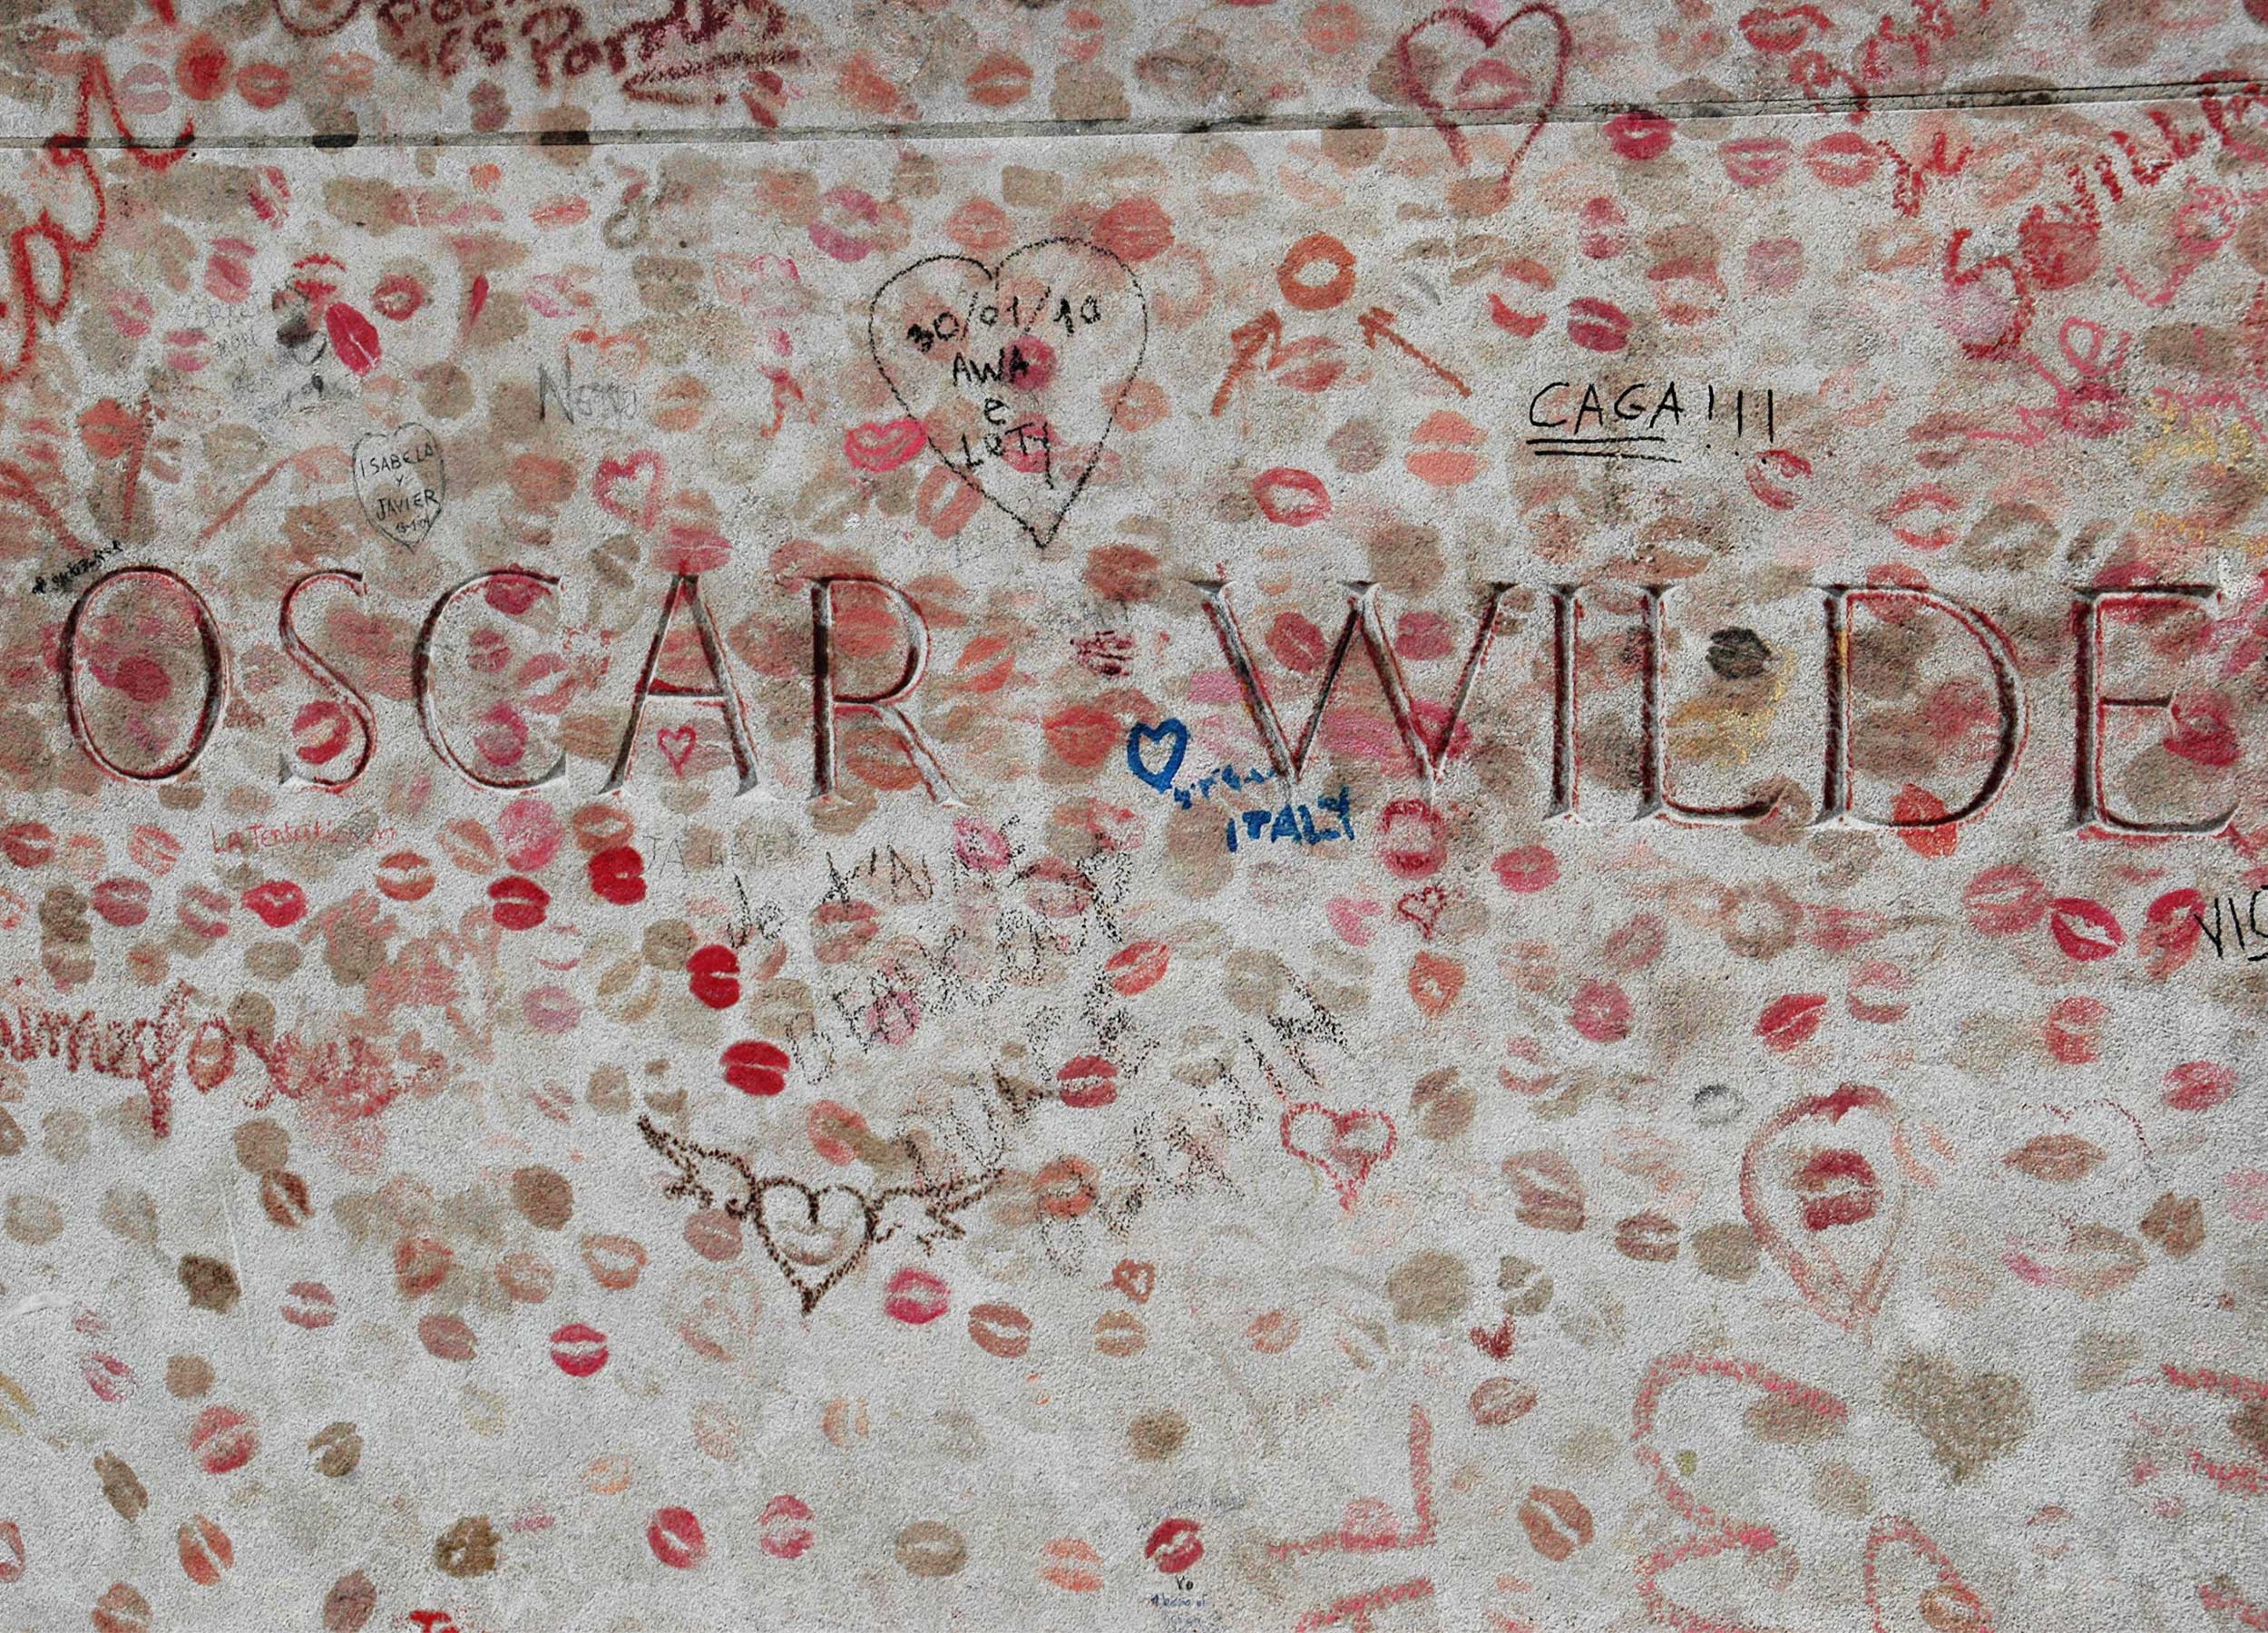 Oscar Wilde gravesite at pere lachaise cemetary, Paris. Grave is filled with lipstick kisses.